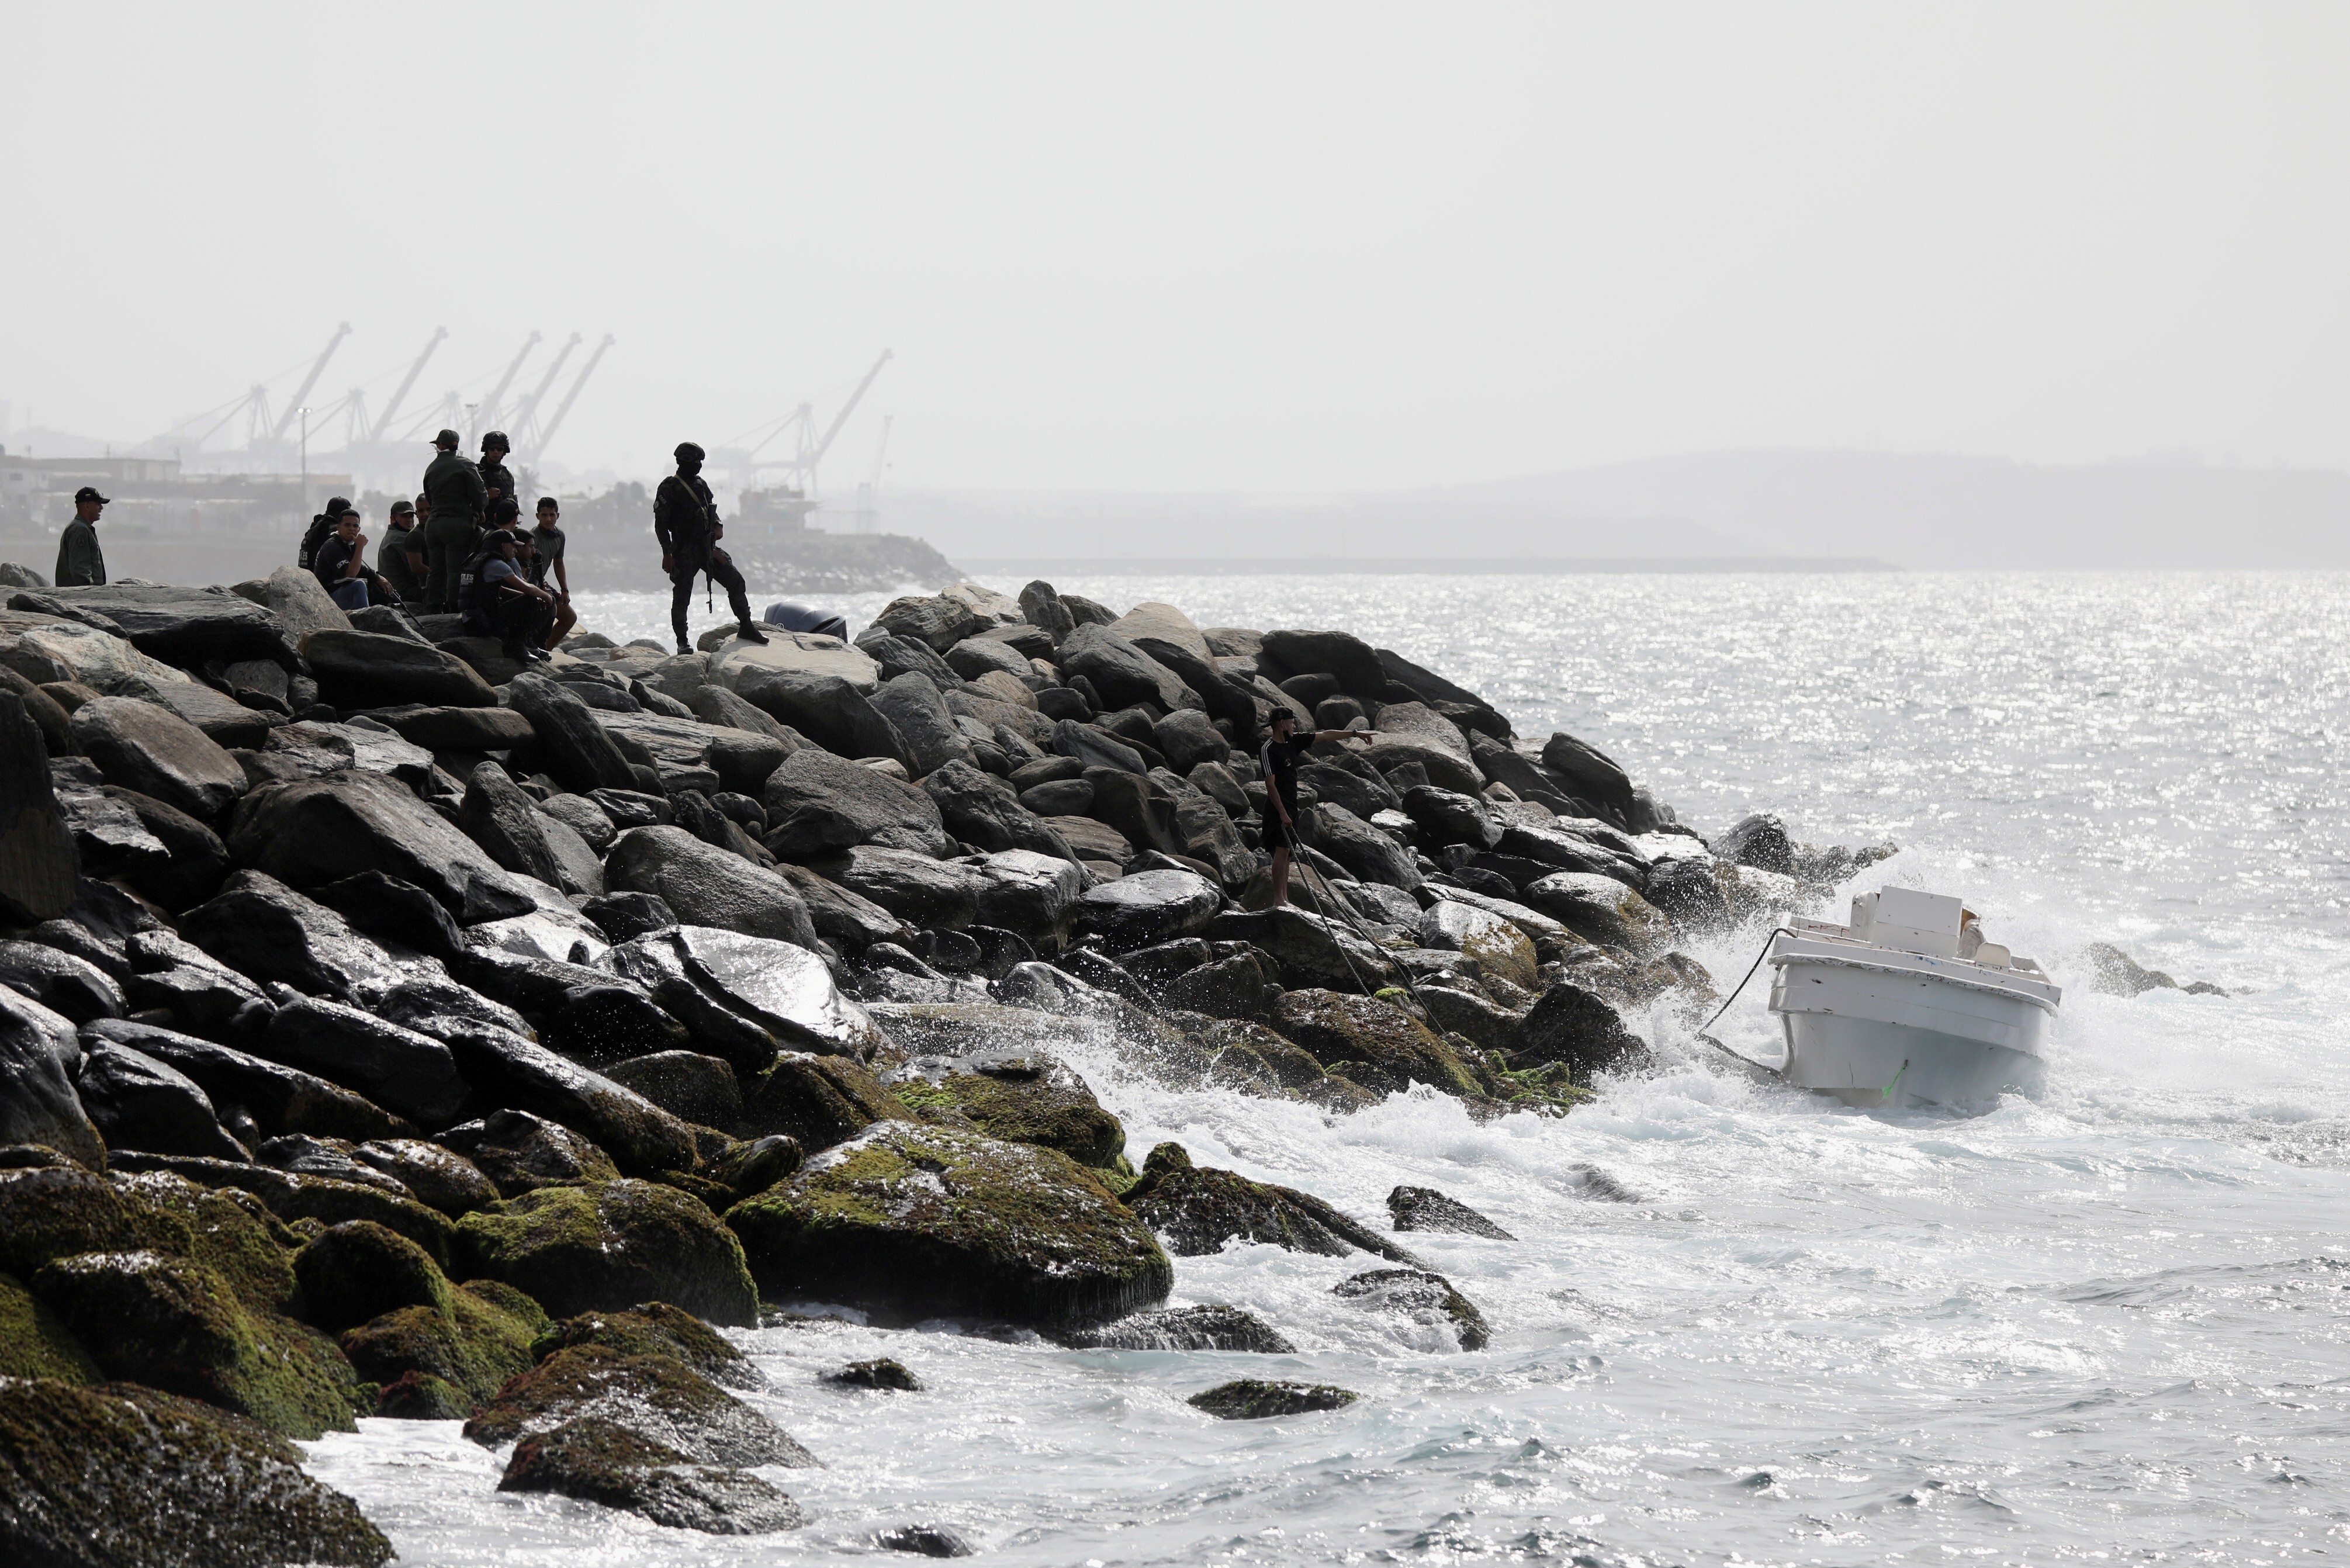 Members of the special forces unit watch an empty boat at a shore, after Venezuela's government announced a failed “mercenary” incursion. Photo: Reuters